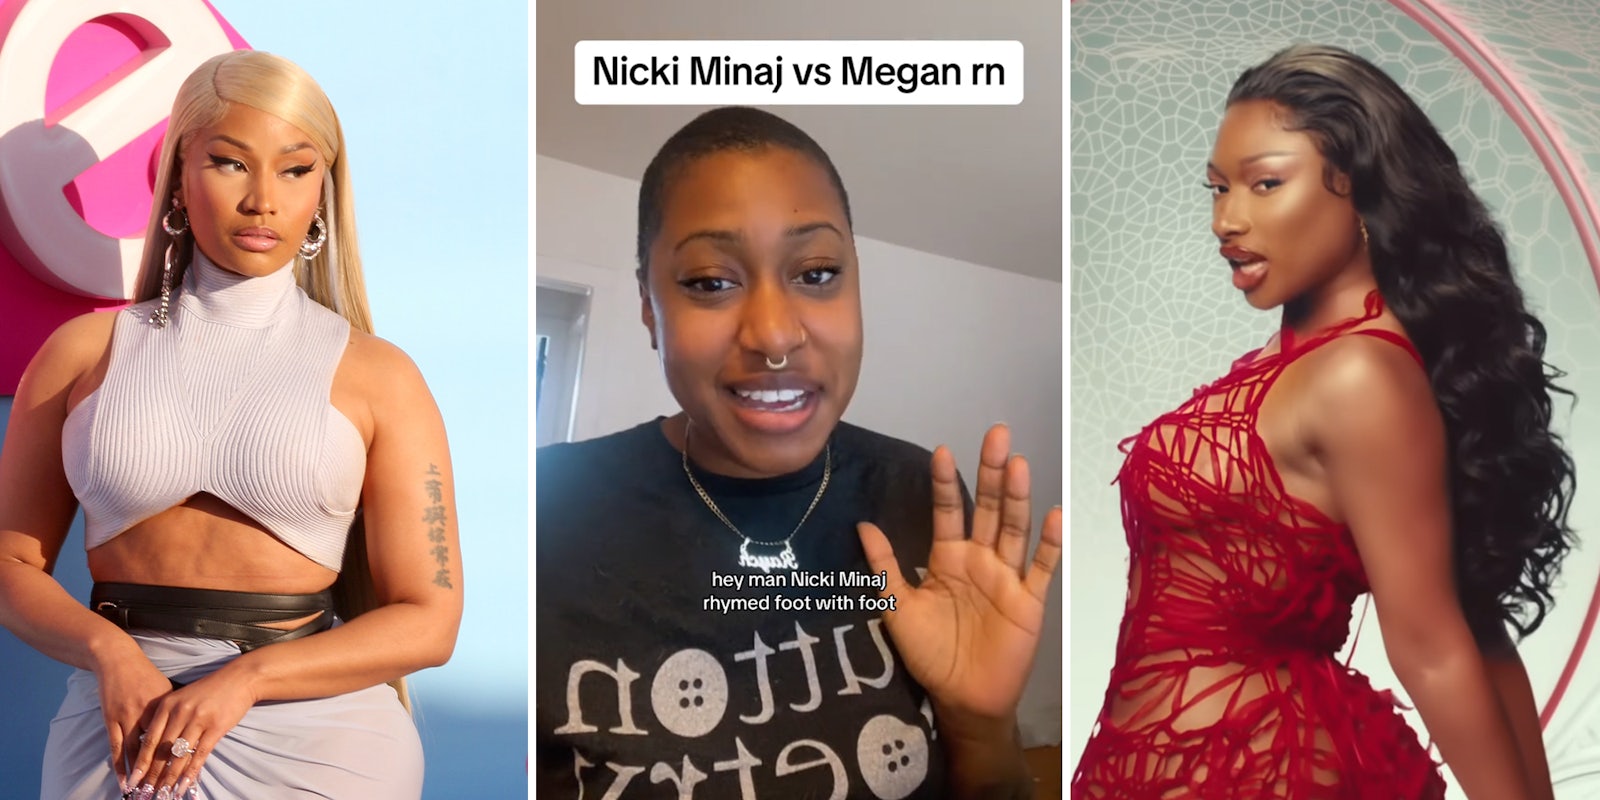 Nicki Minaj fans are turning on her after alleged 'feud' with Megan Thee Stallion escalates